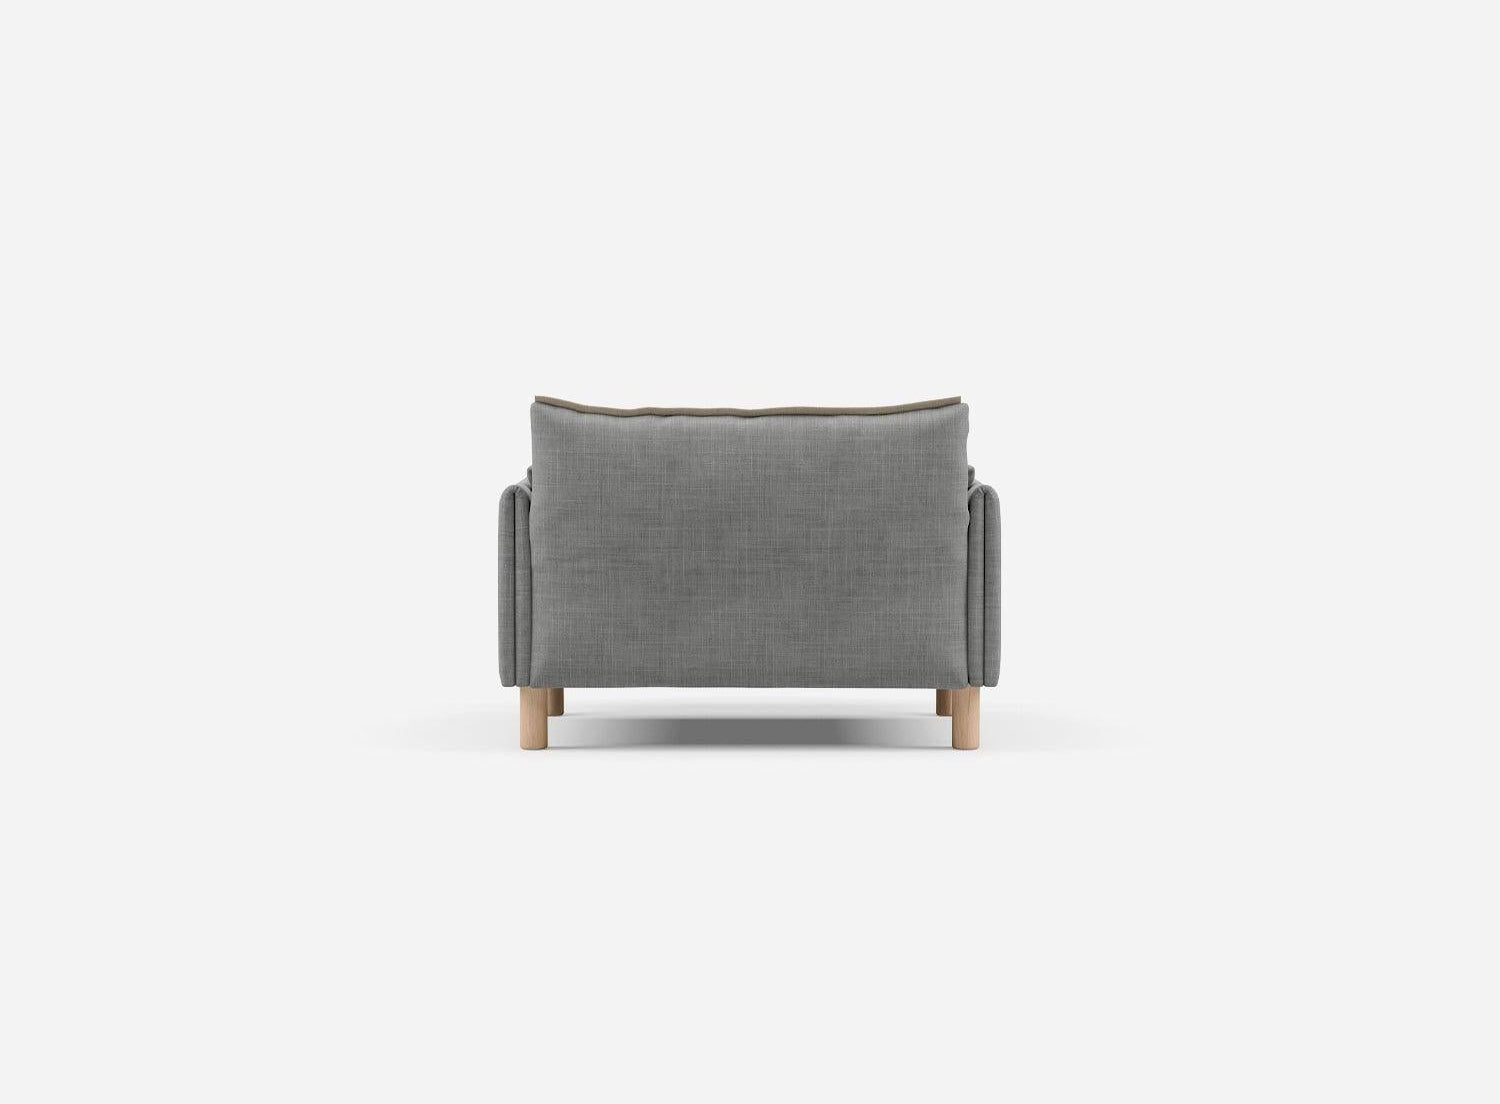 1.5 Seater Chaise Sofa | Weave Light Grey - Cozmo @ Light Grey Weave Jacket | Natural Trim